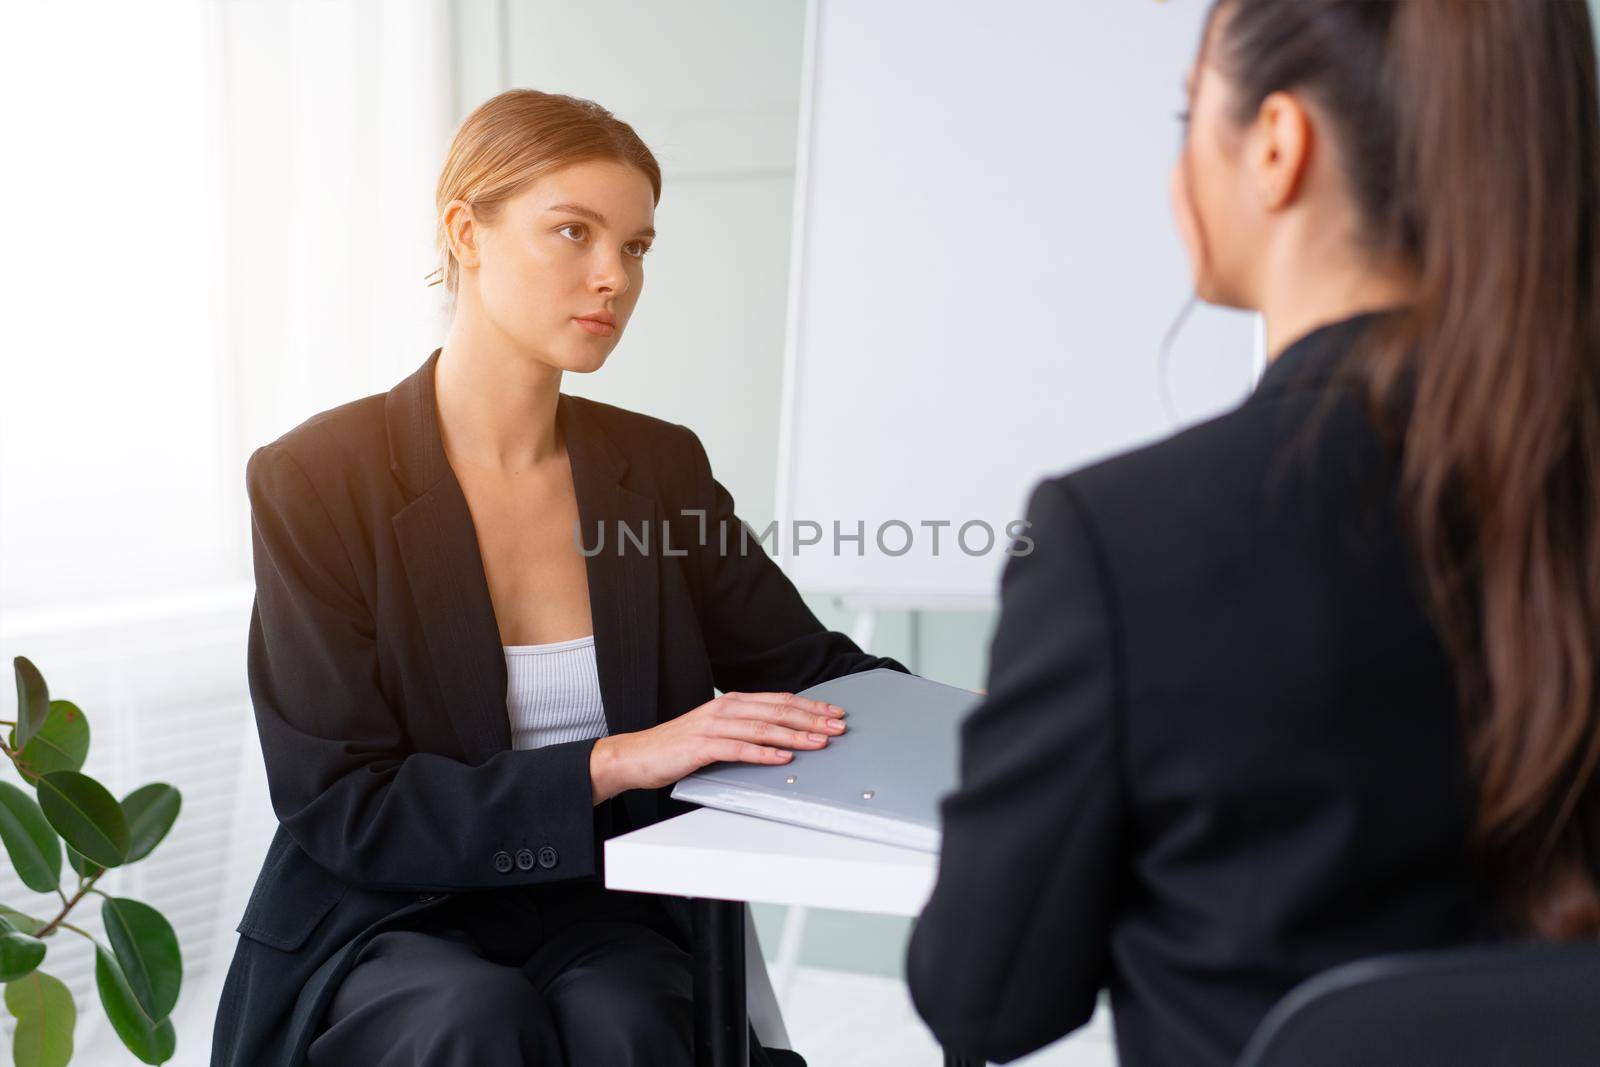 Job interview. Business, career and placement concept. Young blonde woman holding resume, while sitting in front of candidate during corporate meeting or job interview by andreonegin